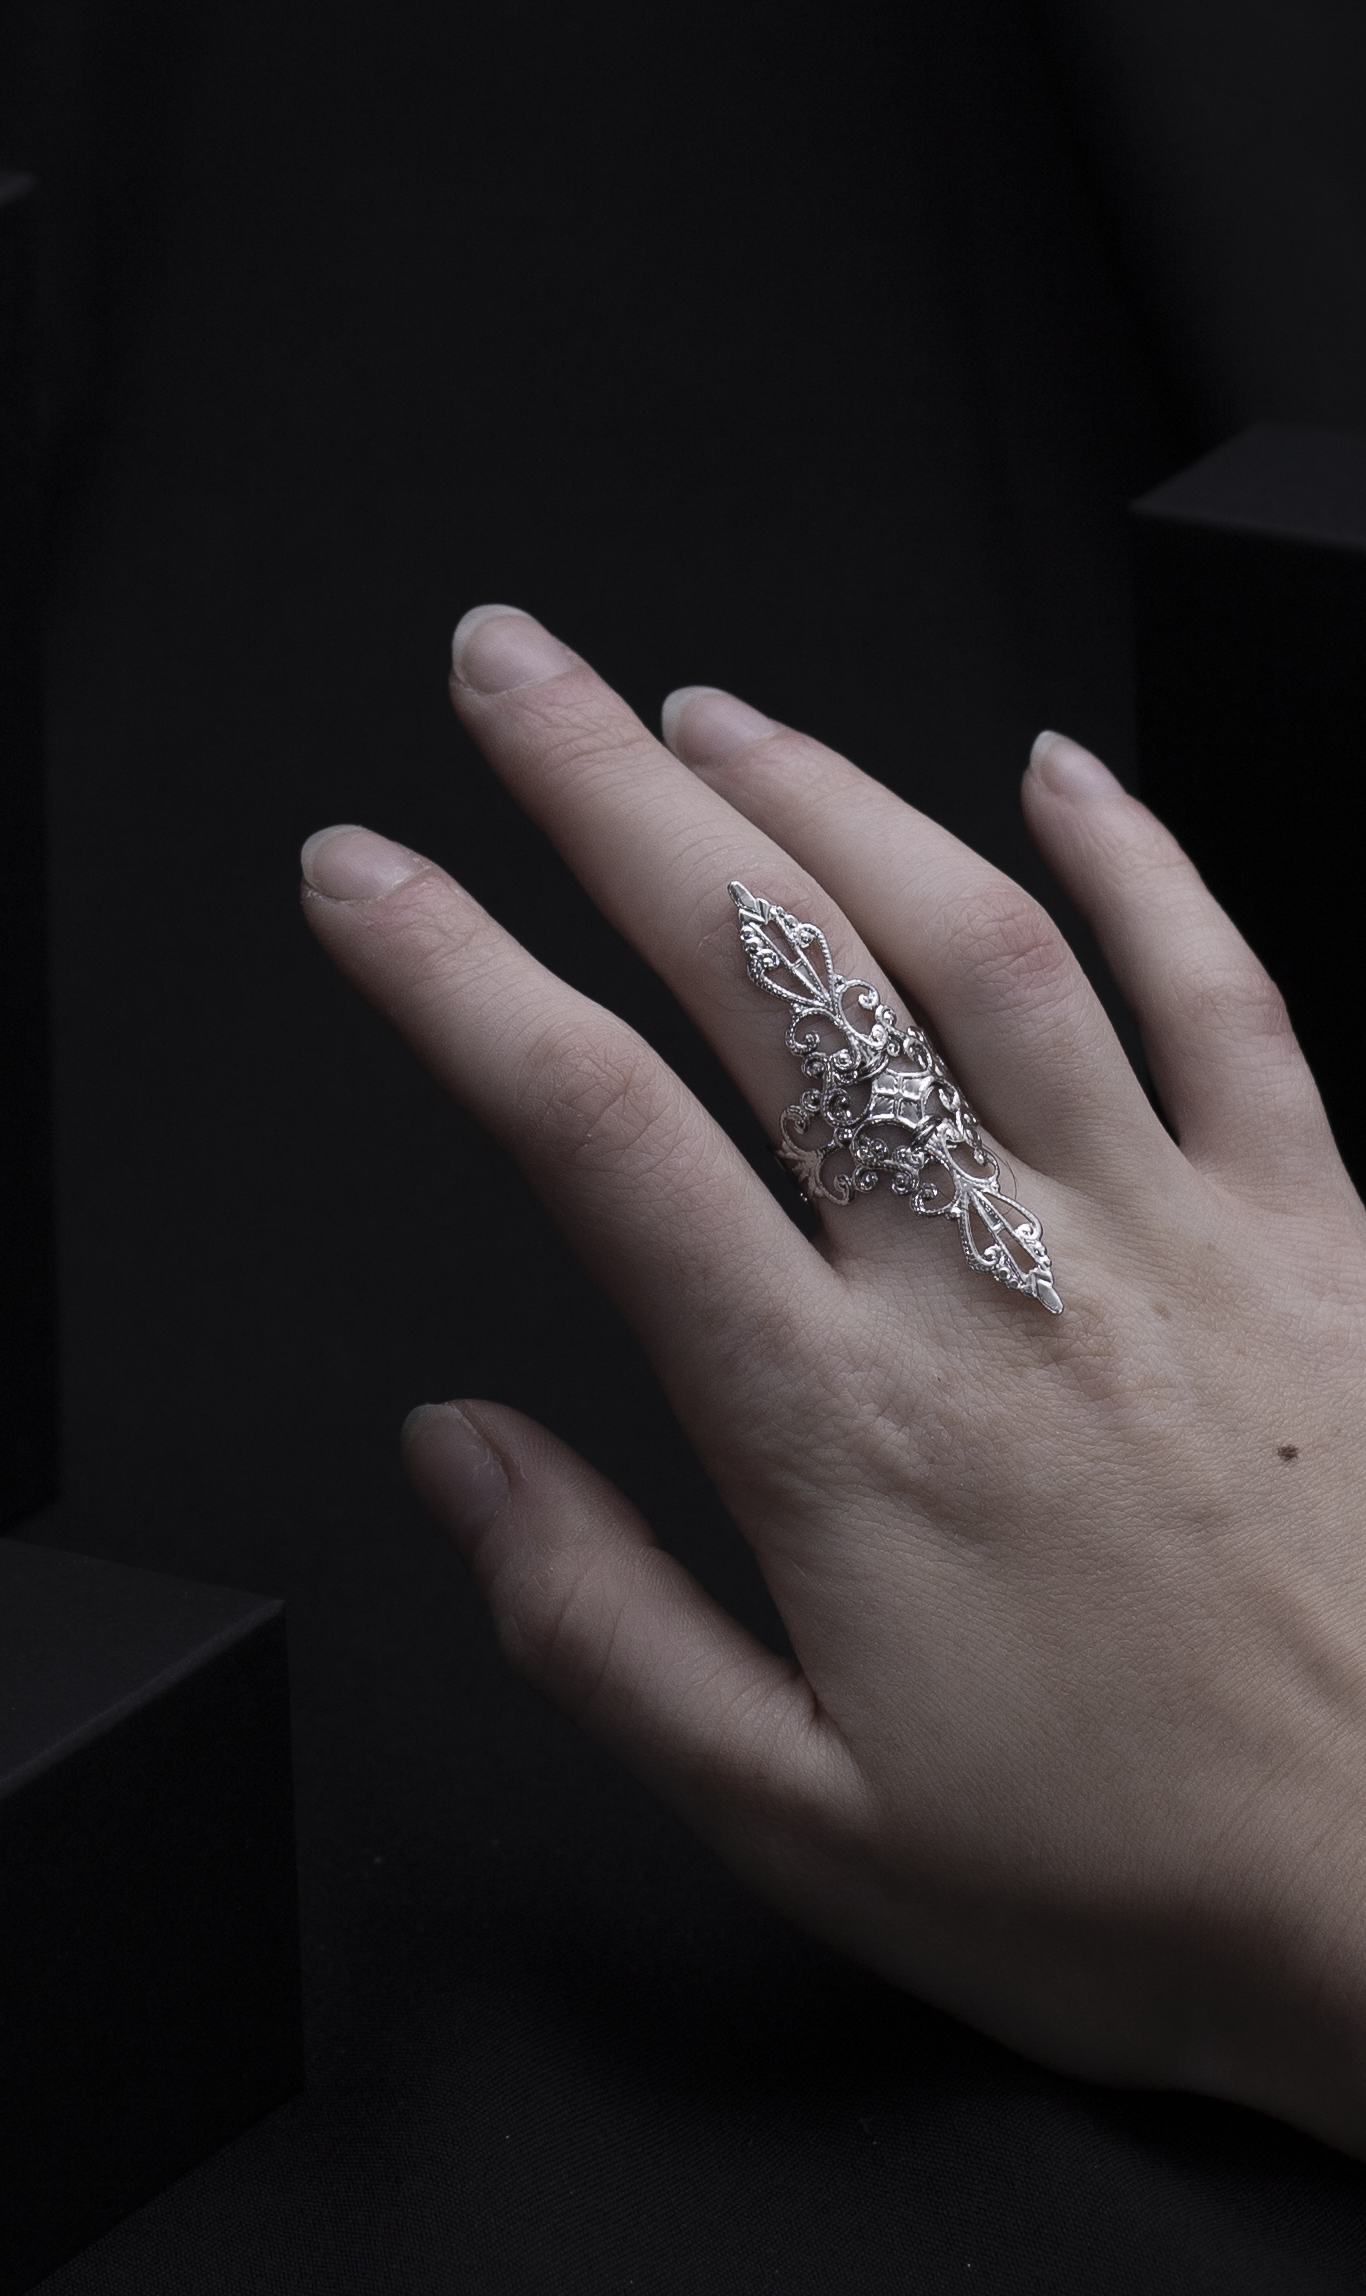 A woman's hand elegantly displaying a silver filigree full-finger ring against a dark background with geometric shapes, embodying a sophisticated gothic style.